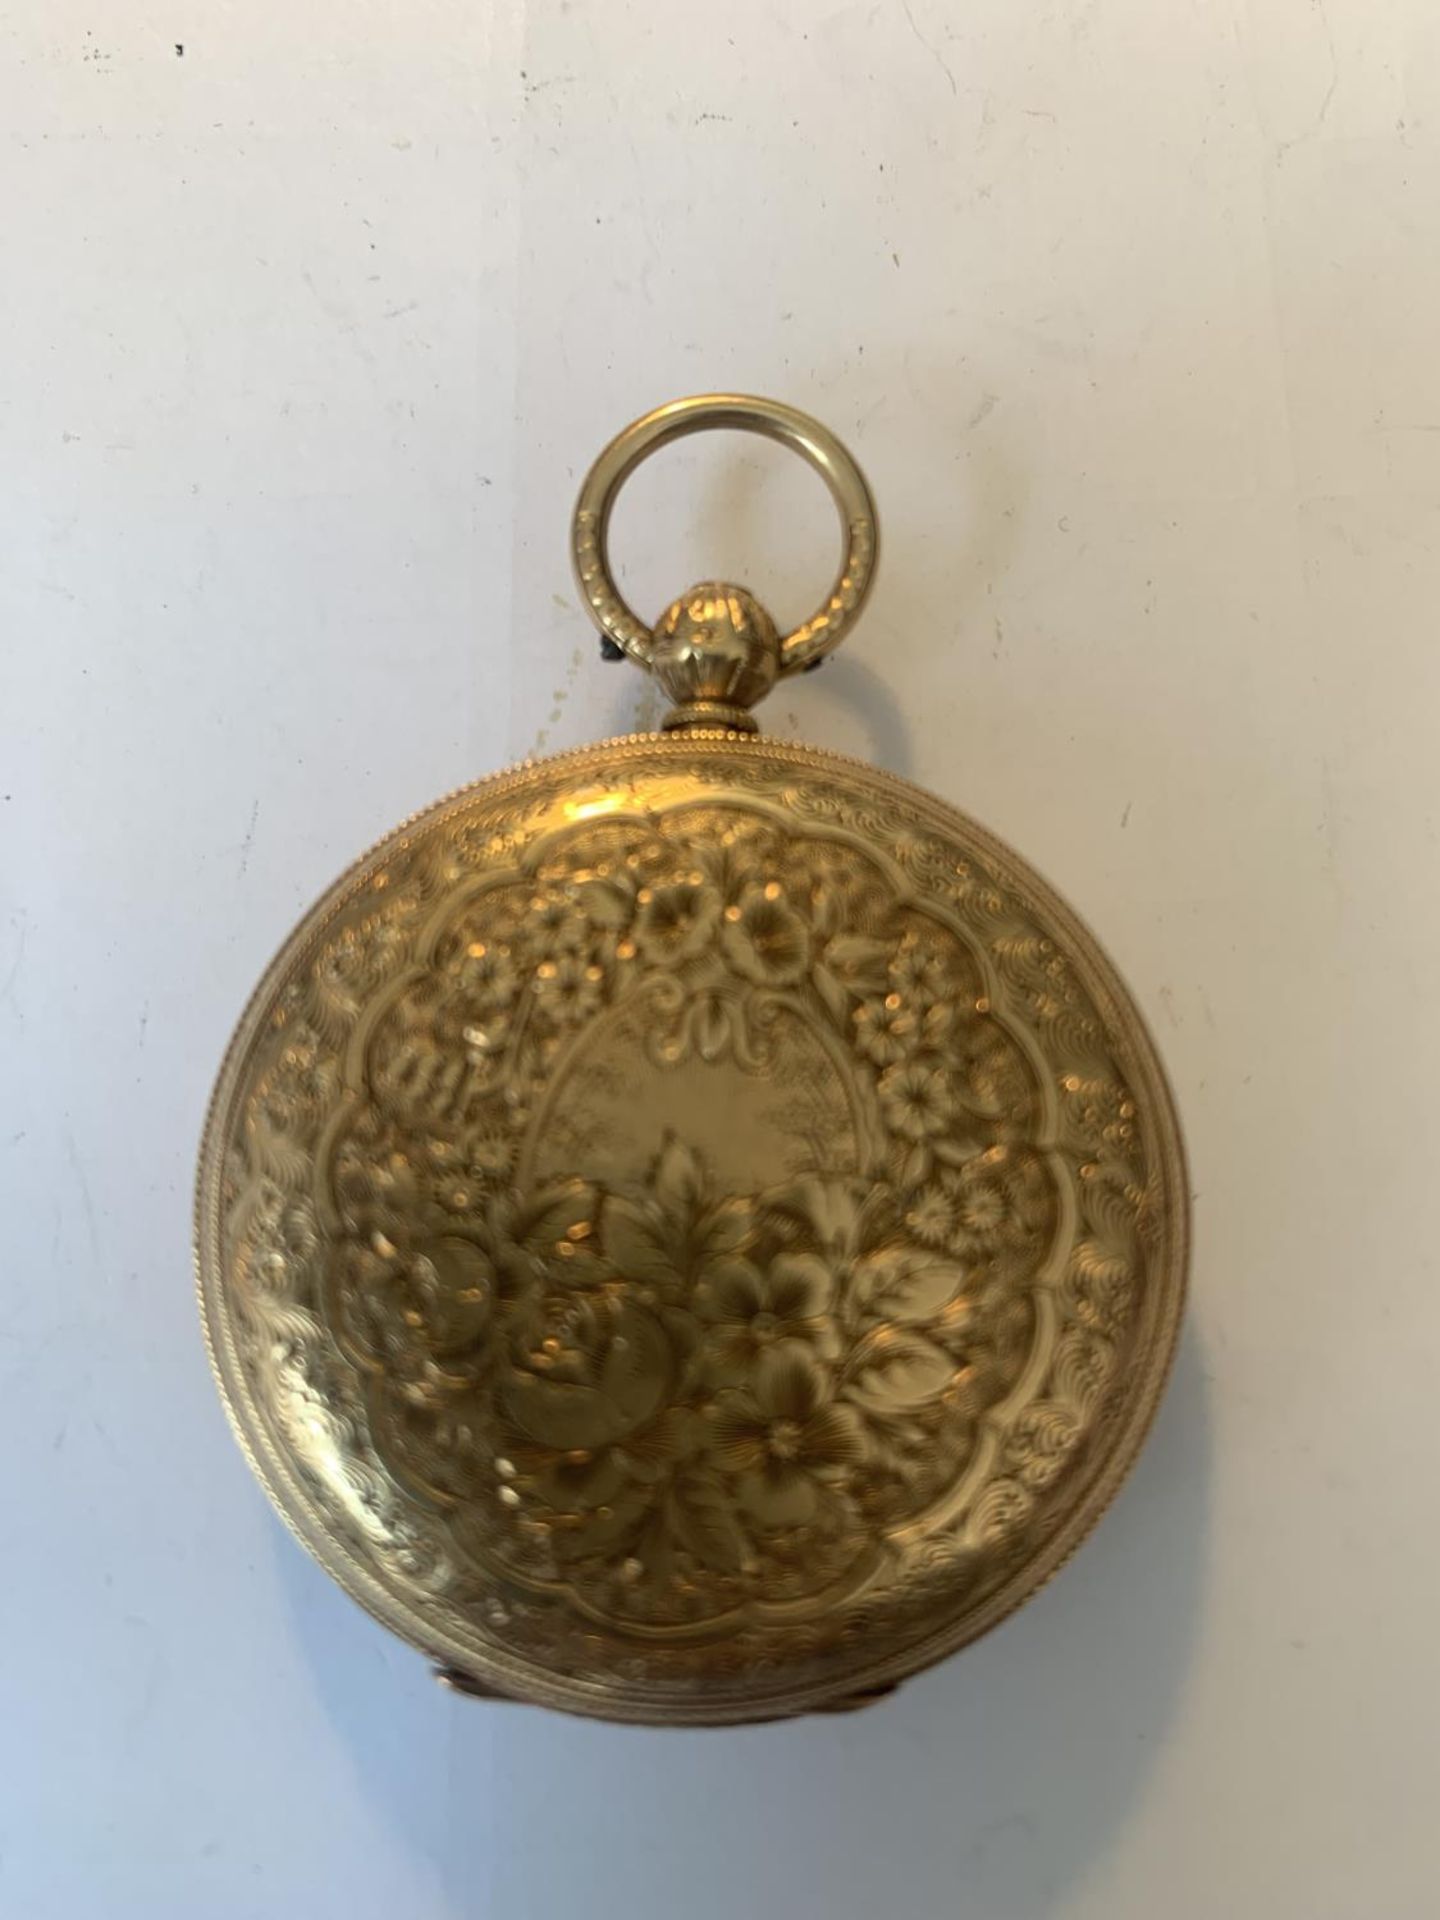 A VINTAGE 18 CARAT GOLD POCKET WATCH WITH DECORATIVE FACE AND ROMAN NUMERALS, KEY AND ORIGINAL BOX - Image 3 of 5